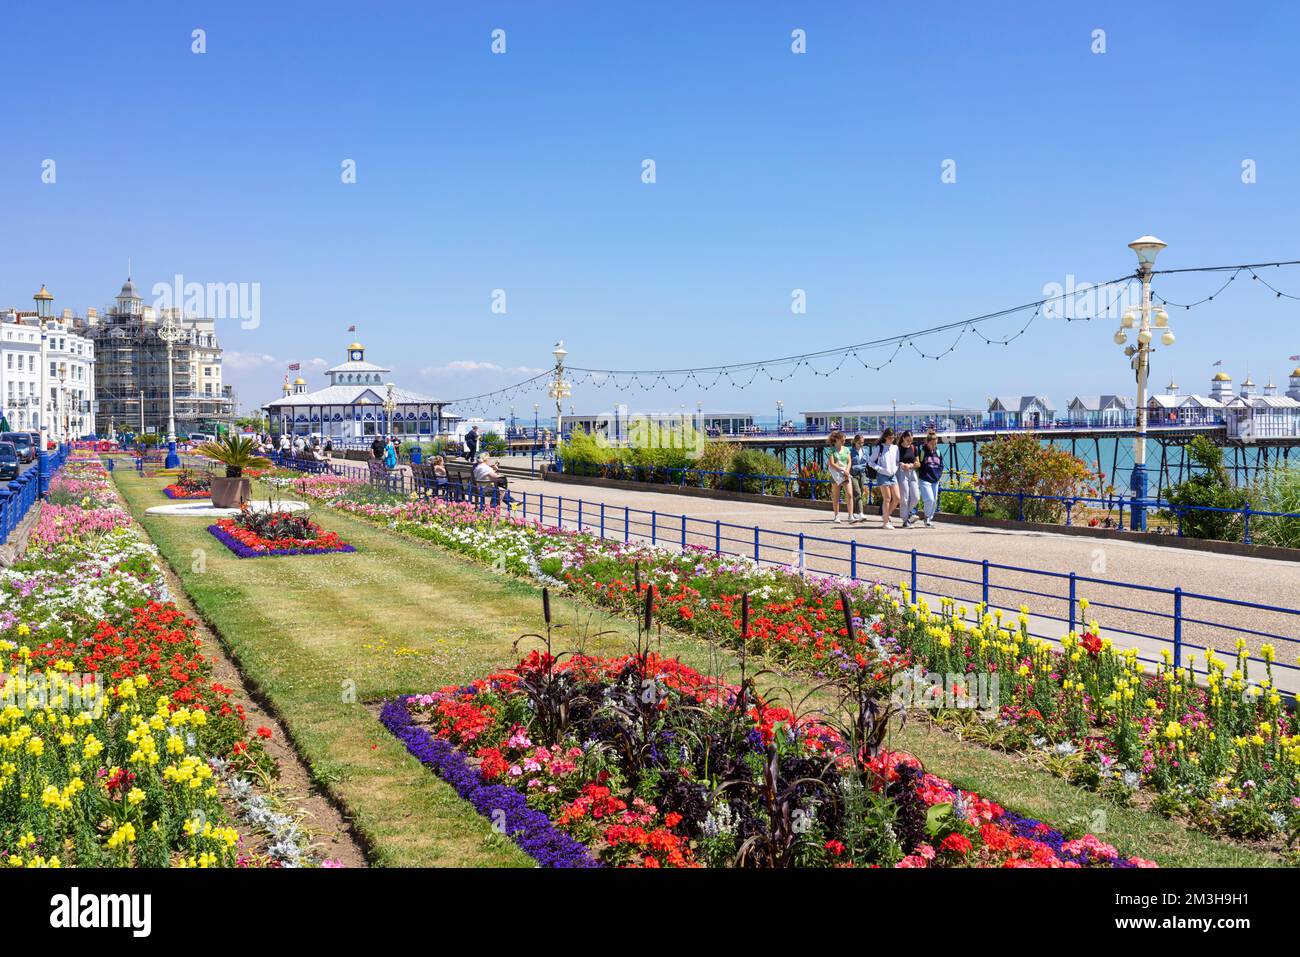 Eastbourne East Sussex the flower filled Carpet gardens on Eastbourne seafront promenade Eastbourne East Sussex England GB UK Europe Stock Photo